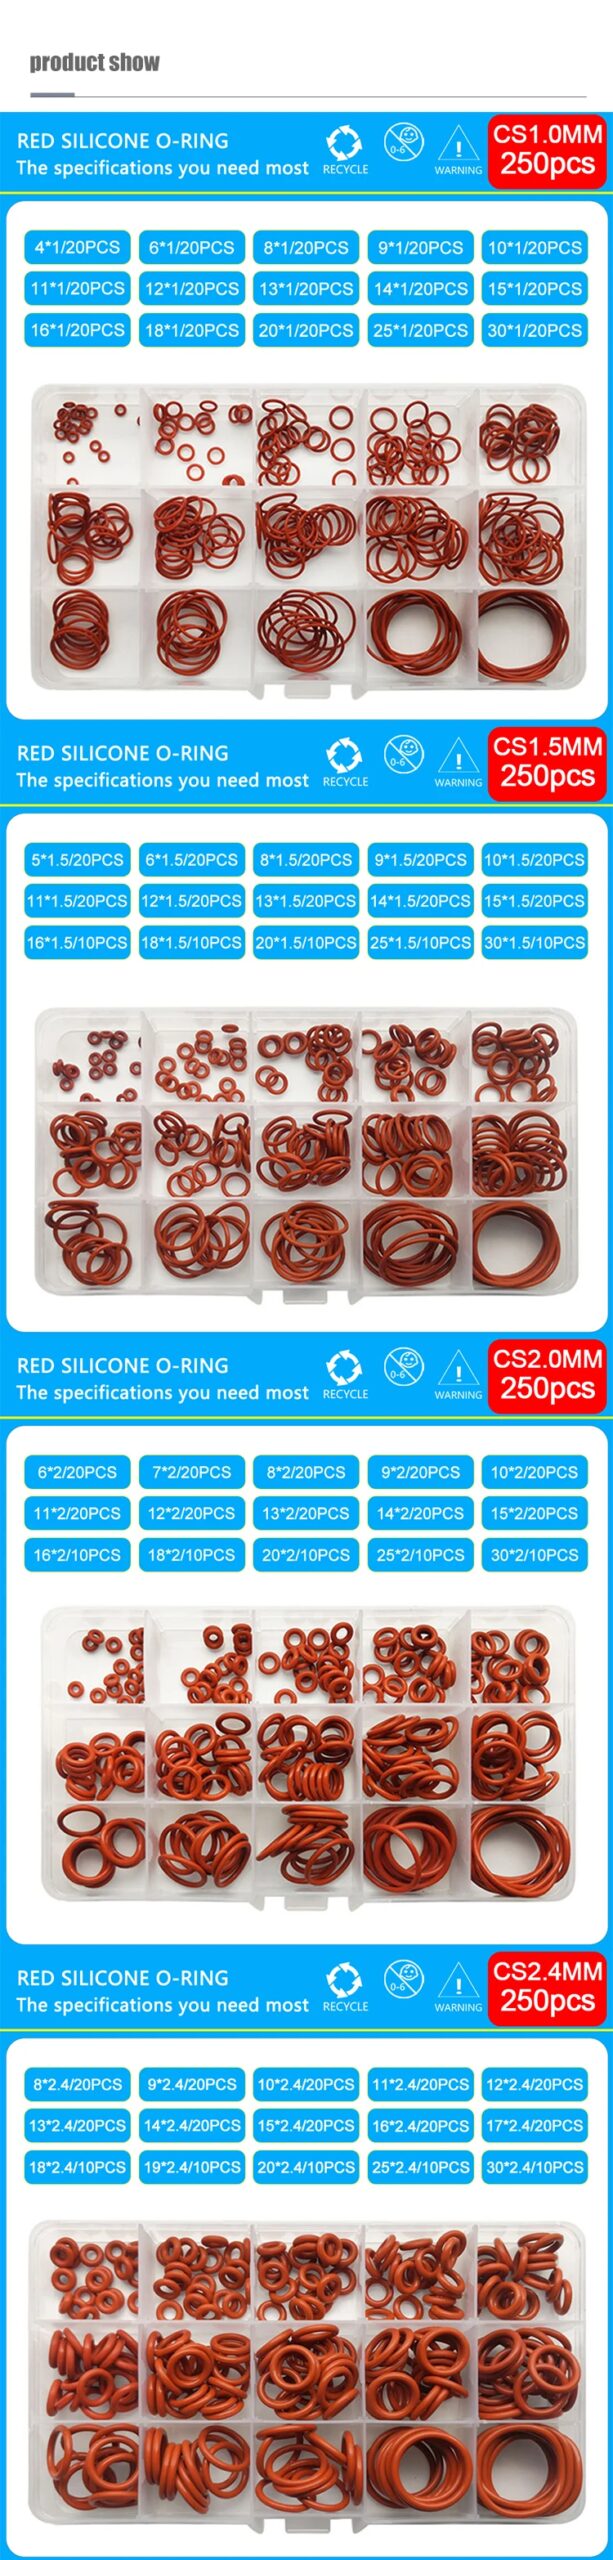 100pcs 150pcs 250pcs Silicone O-ring Sealing Gaskets Waterproof Washer Oil Resistant High Temperature Oring Assortment Kit Sets